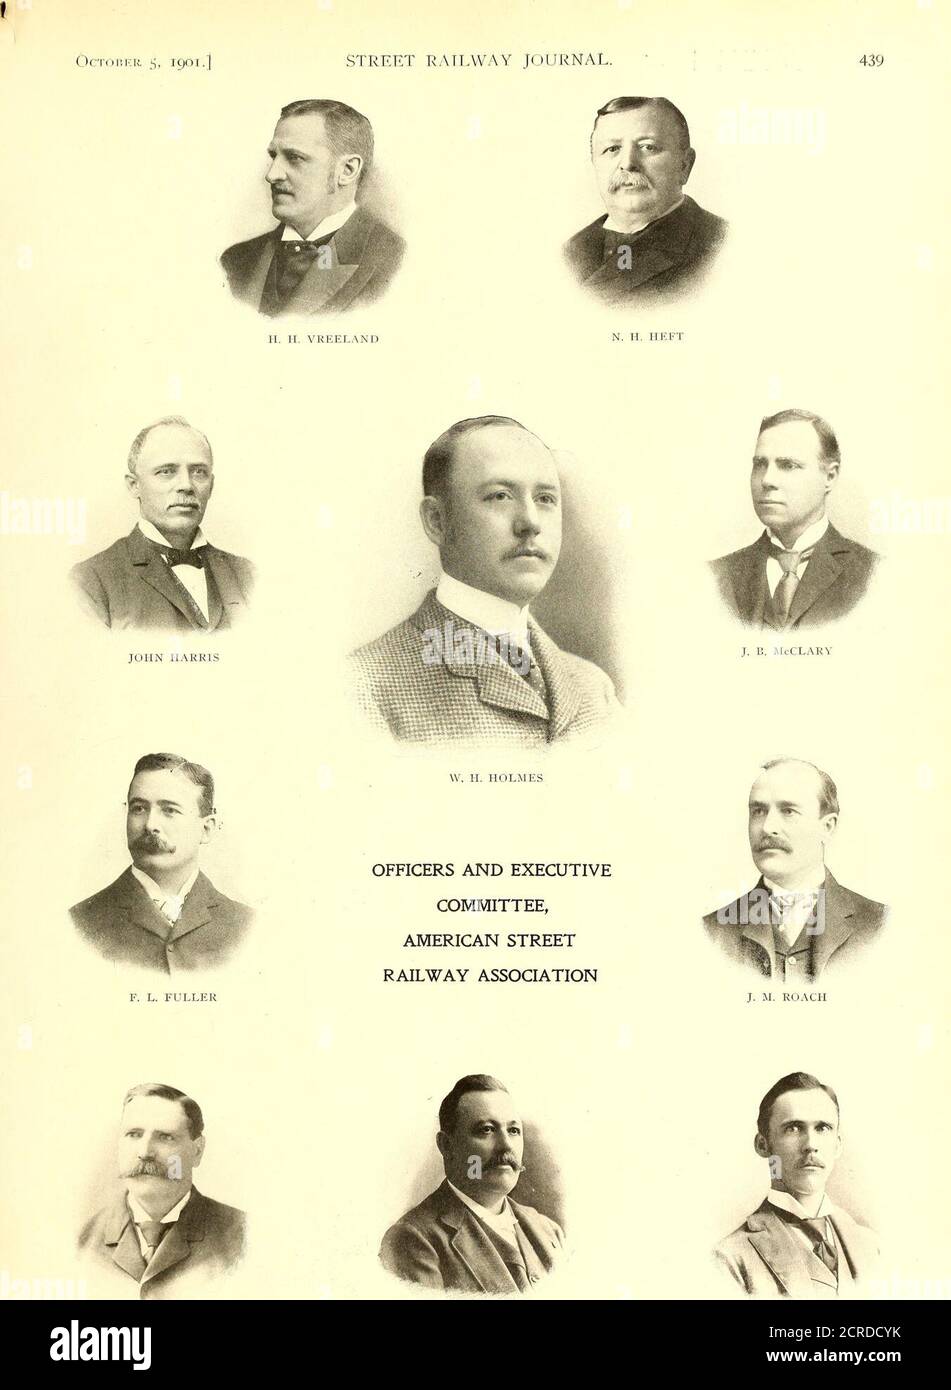 . The Street railway journal . ,general auditor Stone & Websters Companies, Boston,Mass., chairman. Annual Report—Standard System ofStreet Railway Accounting, by C. N. Duffy, auditor Chi-cago City Railway, Chicago, 111., chairman; 2 130 p. m.—Paper—Conductors Accounts, by Elmer M. White,cashier Hartford Street Railway, Hartford, Conn. Report—Standard Unit of Comparison, by H. C. Mackay,comptroller Milwaukee Electric Railway & Light Company,Milwaukee, Wis., chairman. Reports of convention com-mittees. Election of officers. TRANSPORTATION TO NEW YORK The passenger associations have granted the u Stock Photo